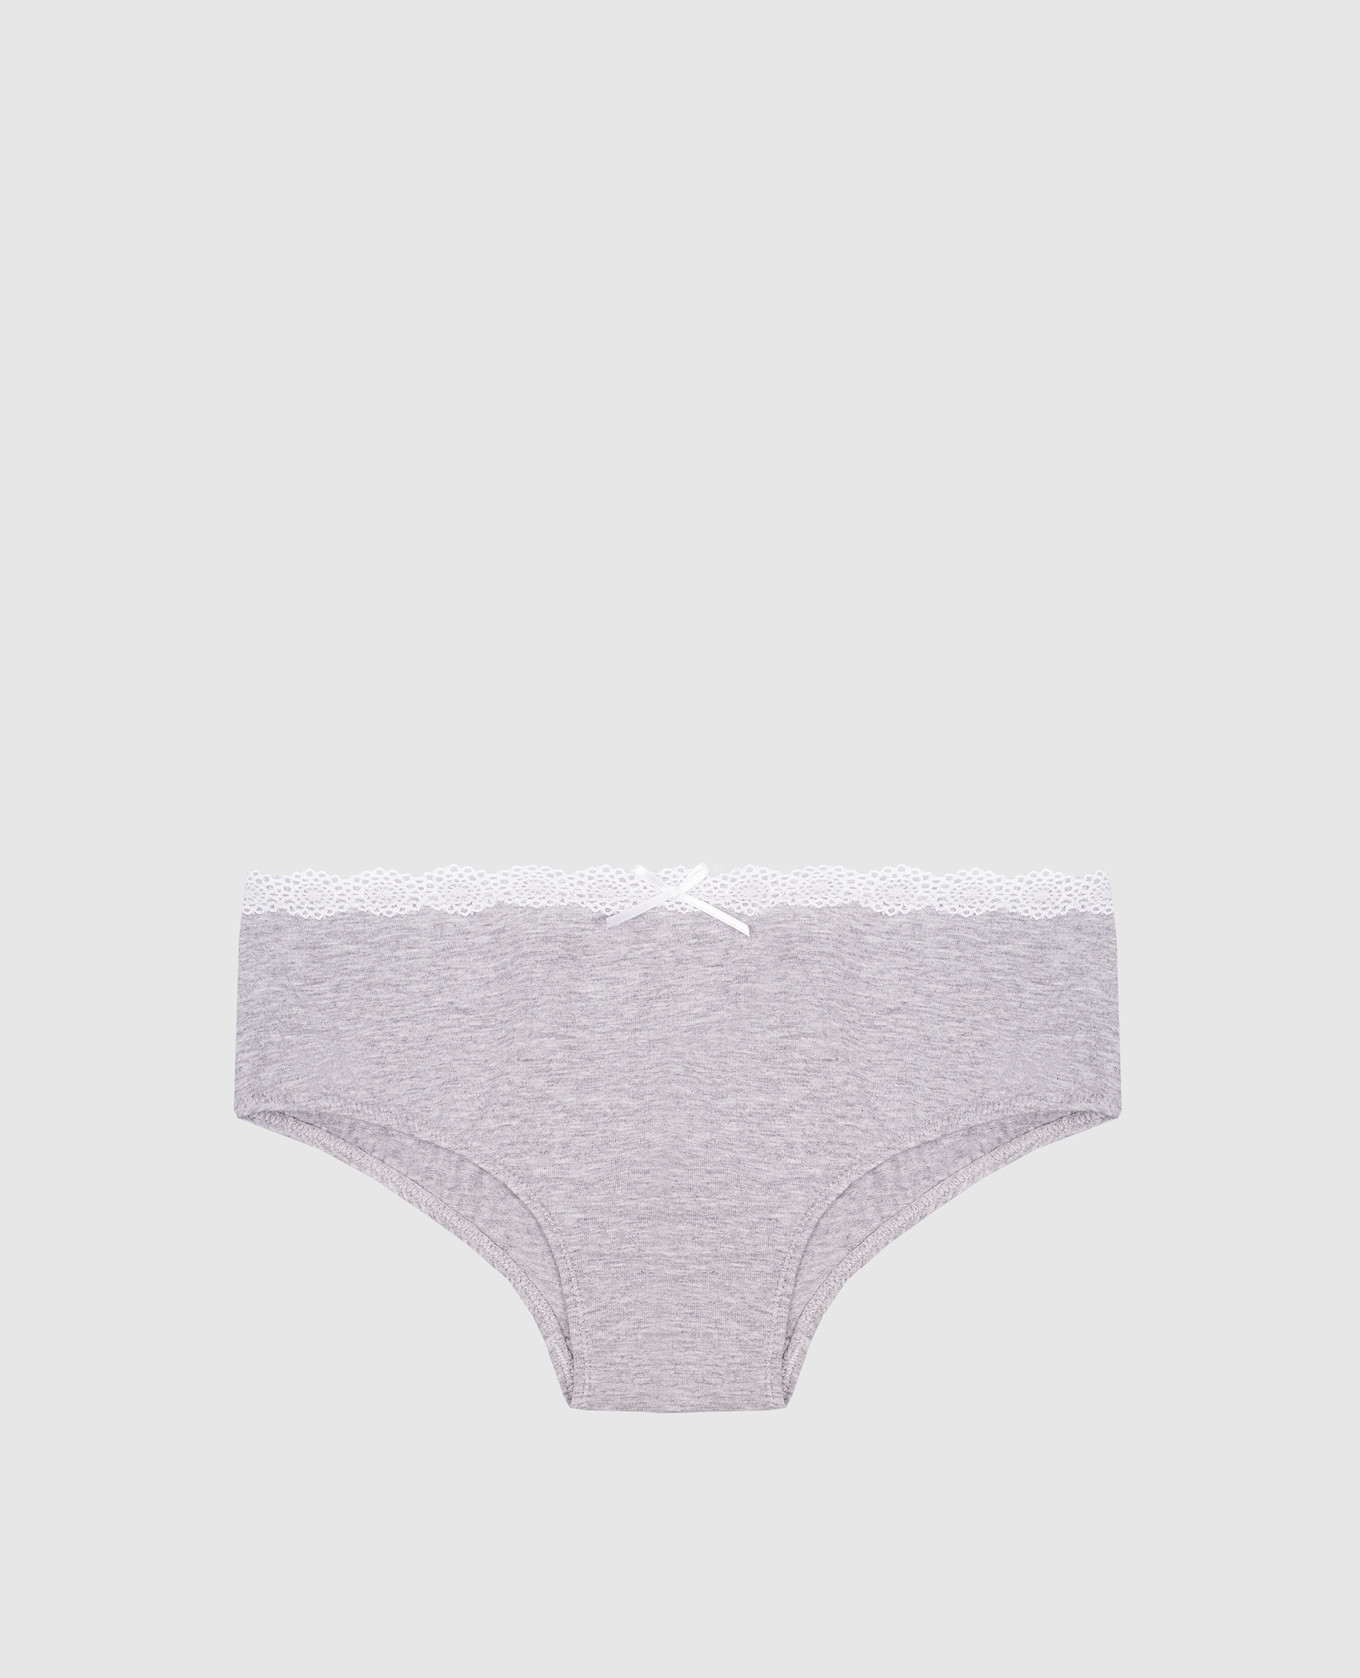 Children's gray panties with lace